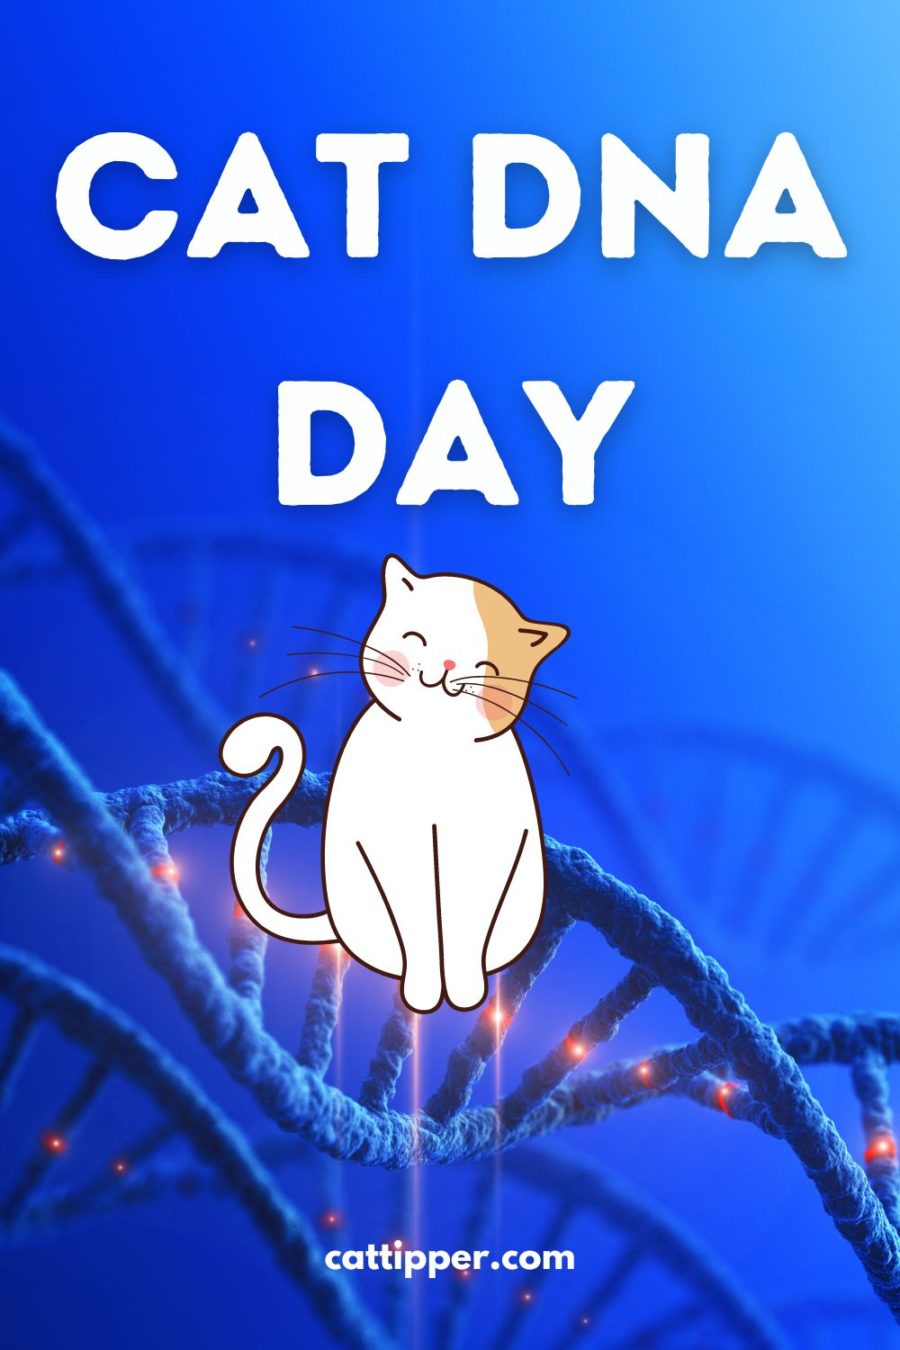 are you curious about your cat's DNA? Cat DNA Day